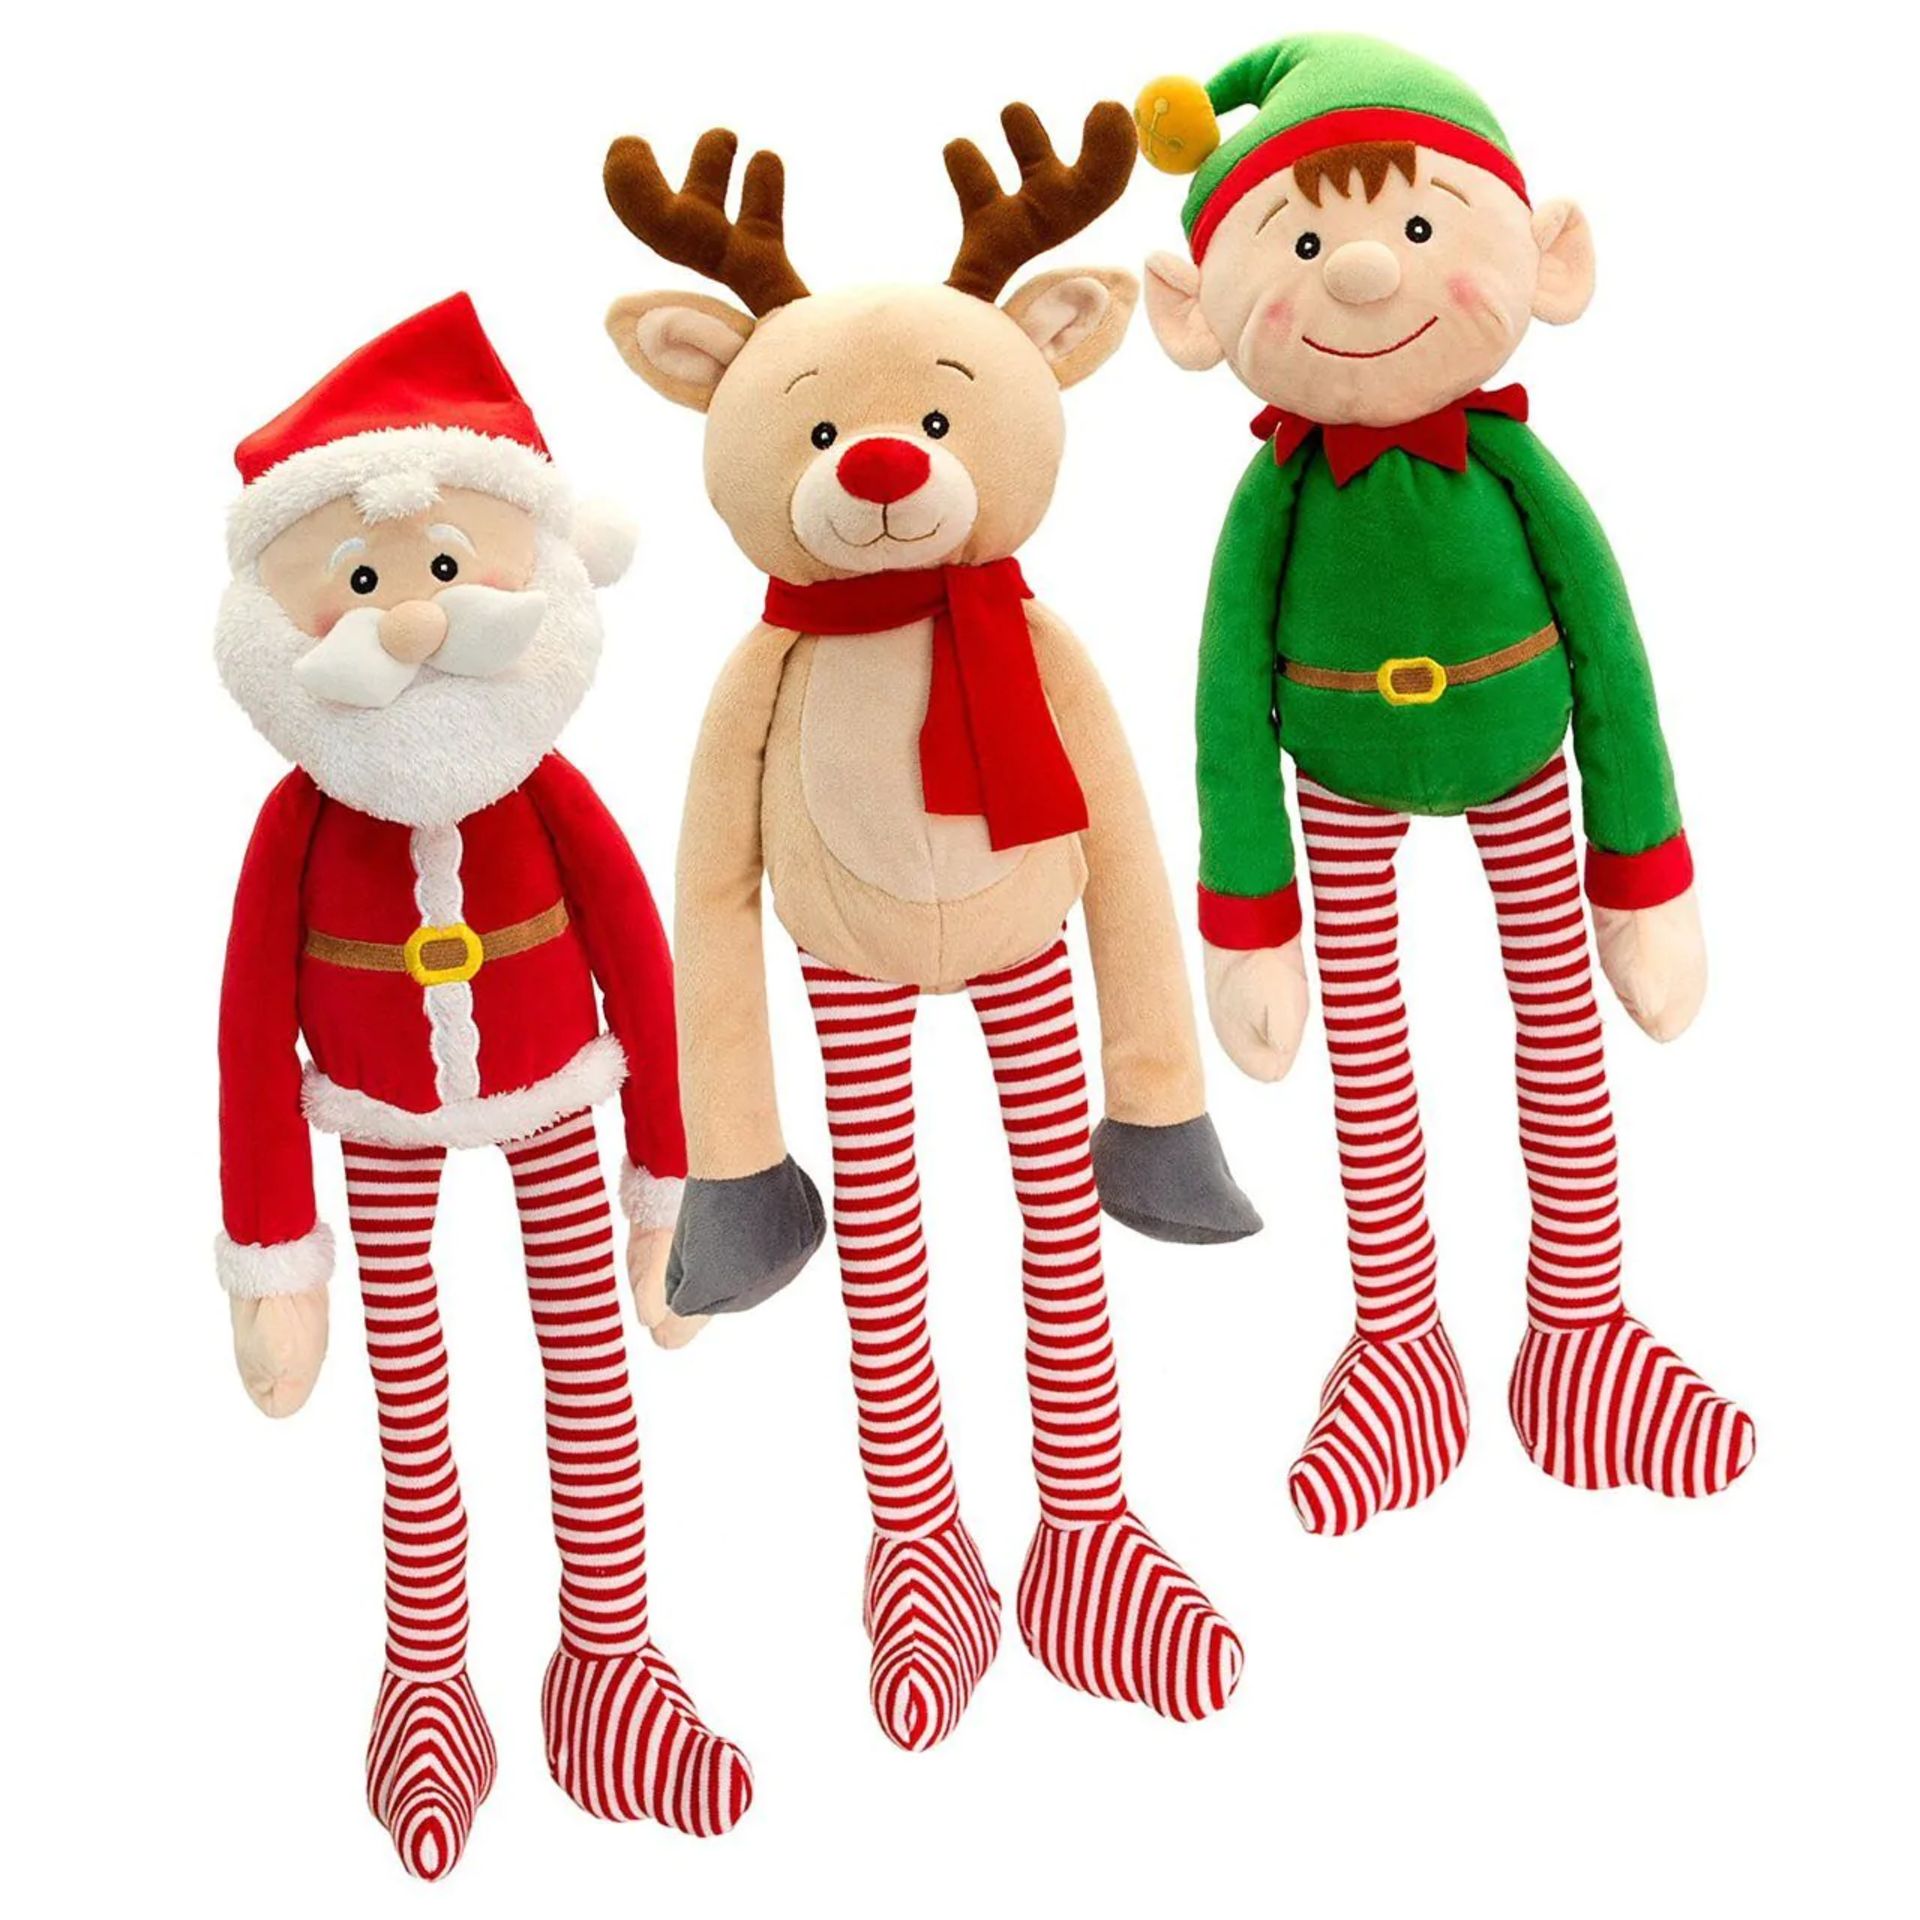 KEEL TOYS 30CM DANGLY XMAS CHARACTERS 3 CHARACTERS - SX0489 1 X CTN